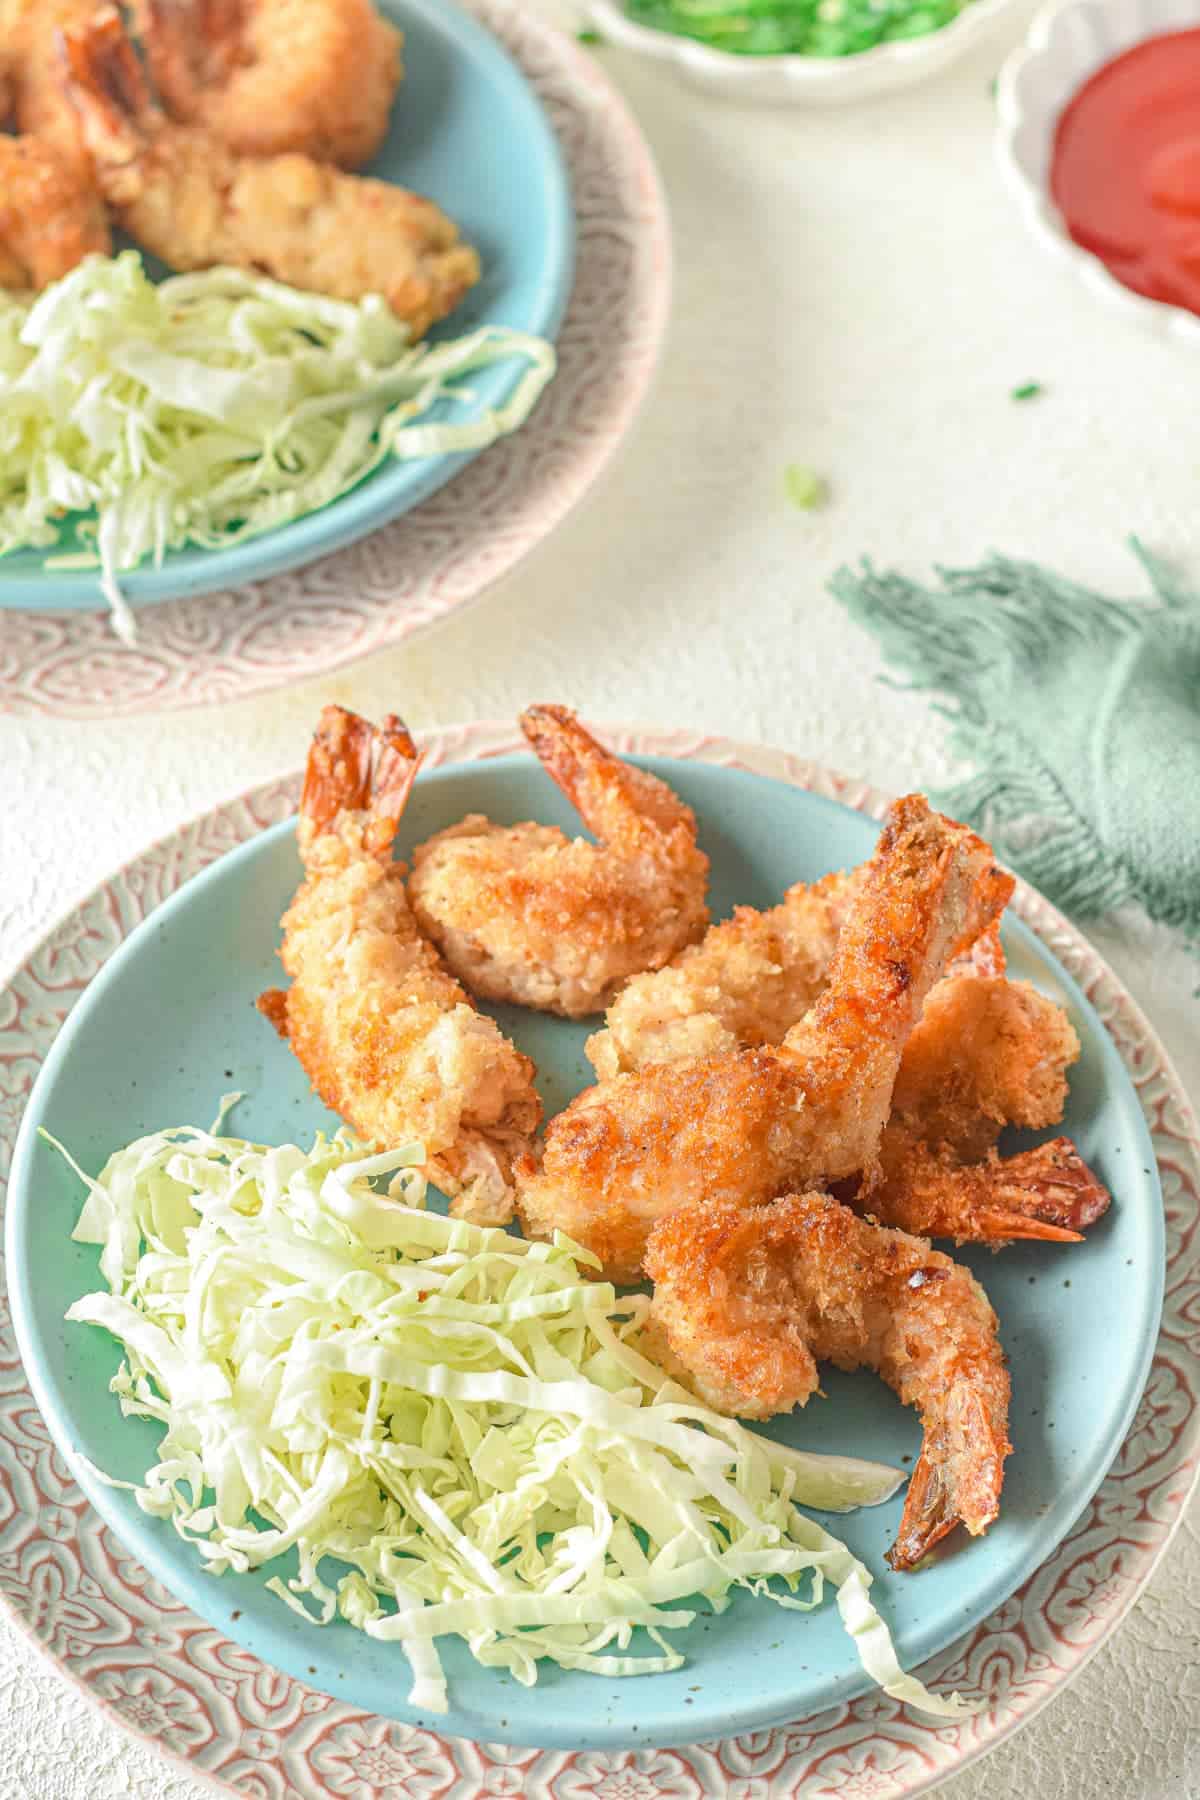 A plate of shrimp and coleslaw on a table.